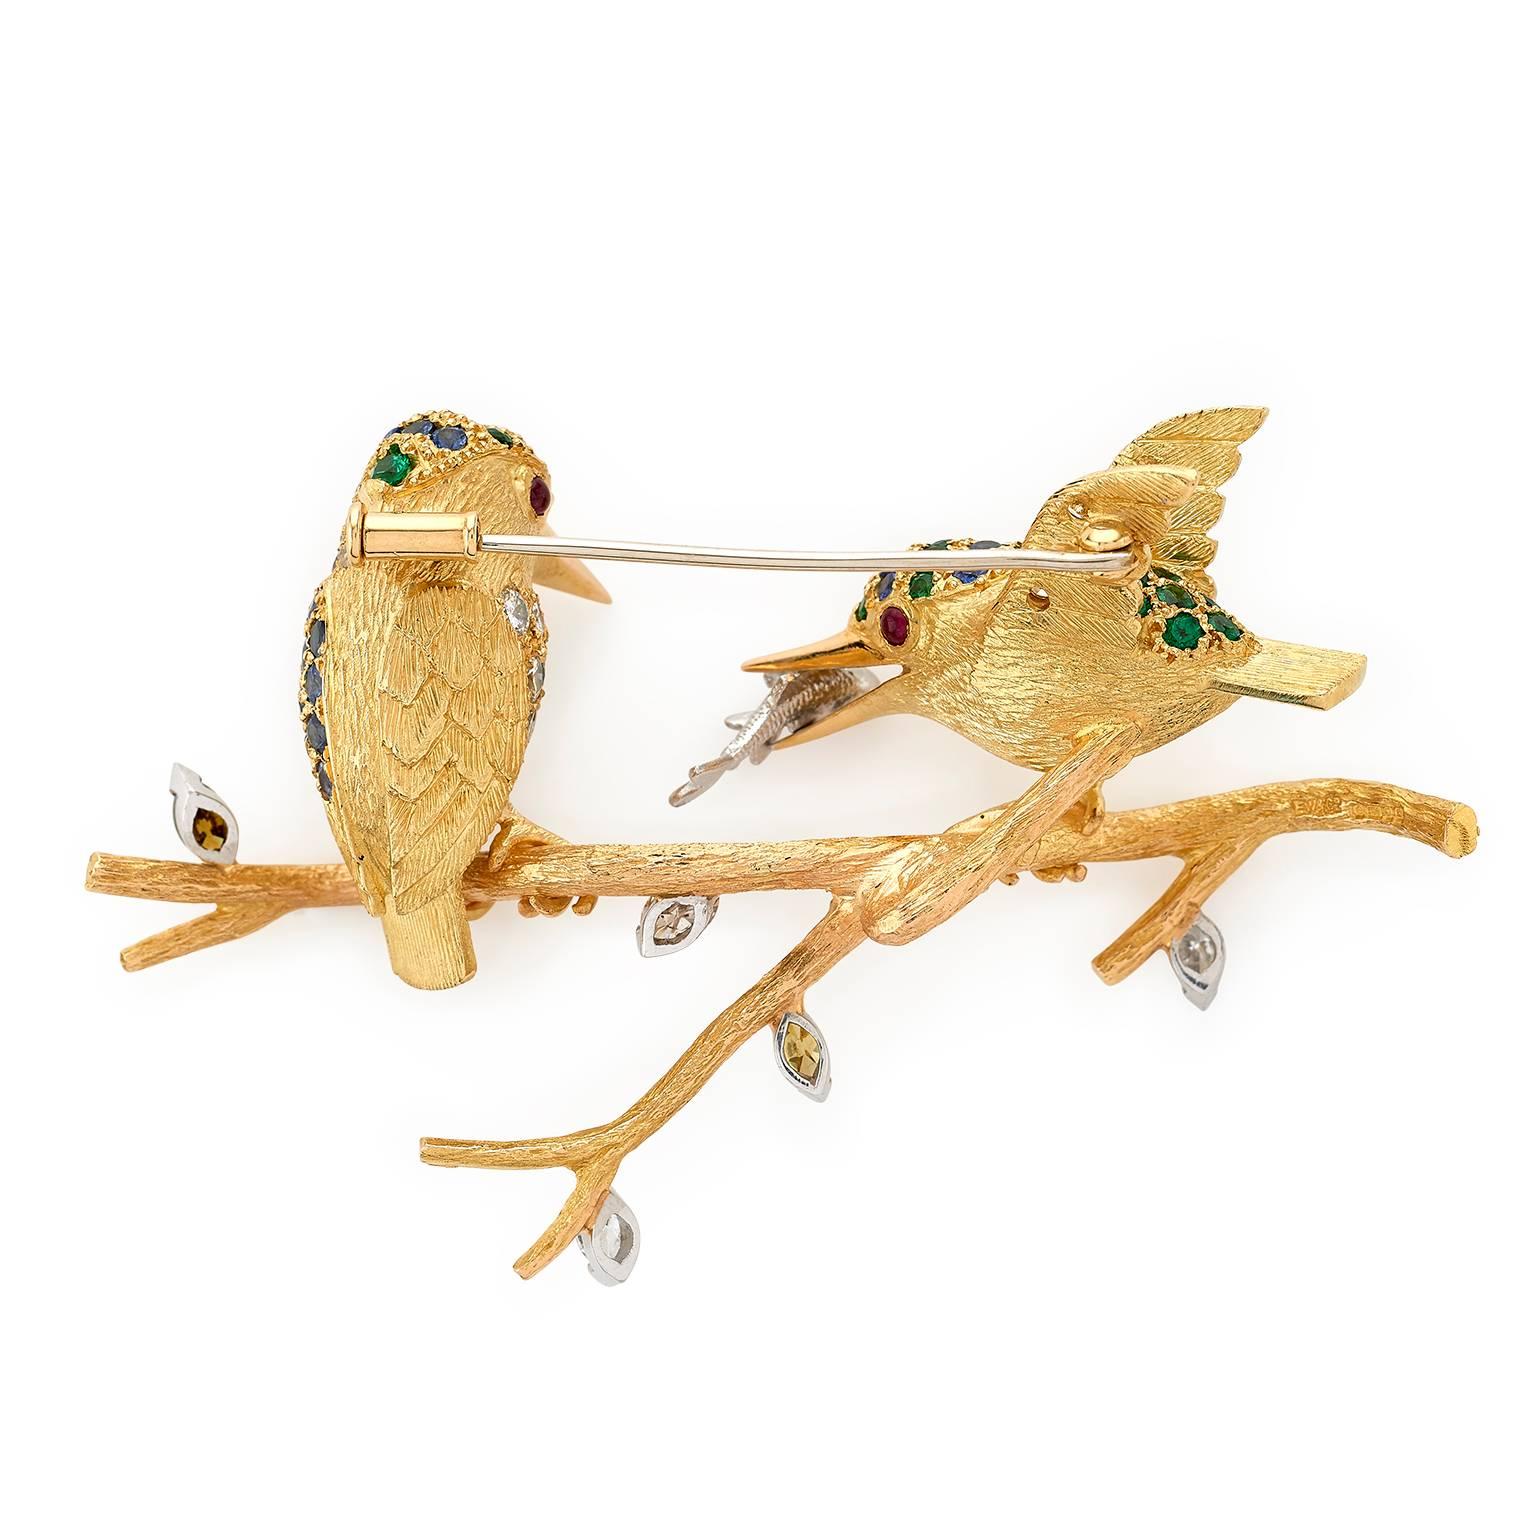 Two gem-set kingfishers brooch hand-carved in 18 carat yellow gold, one with 18 carat white gold fish in its mouth. The birds are set with 1.29 carats blue sapphires, 4.25 carats diamonds, 1.21 carats tsavorite garnets, ruby eyes and perched on 18